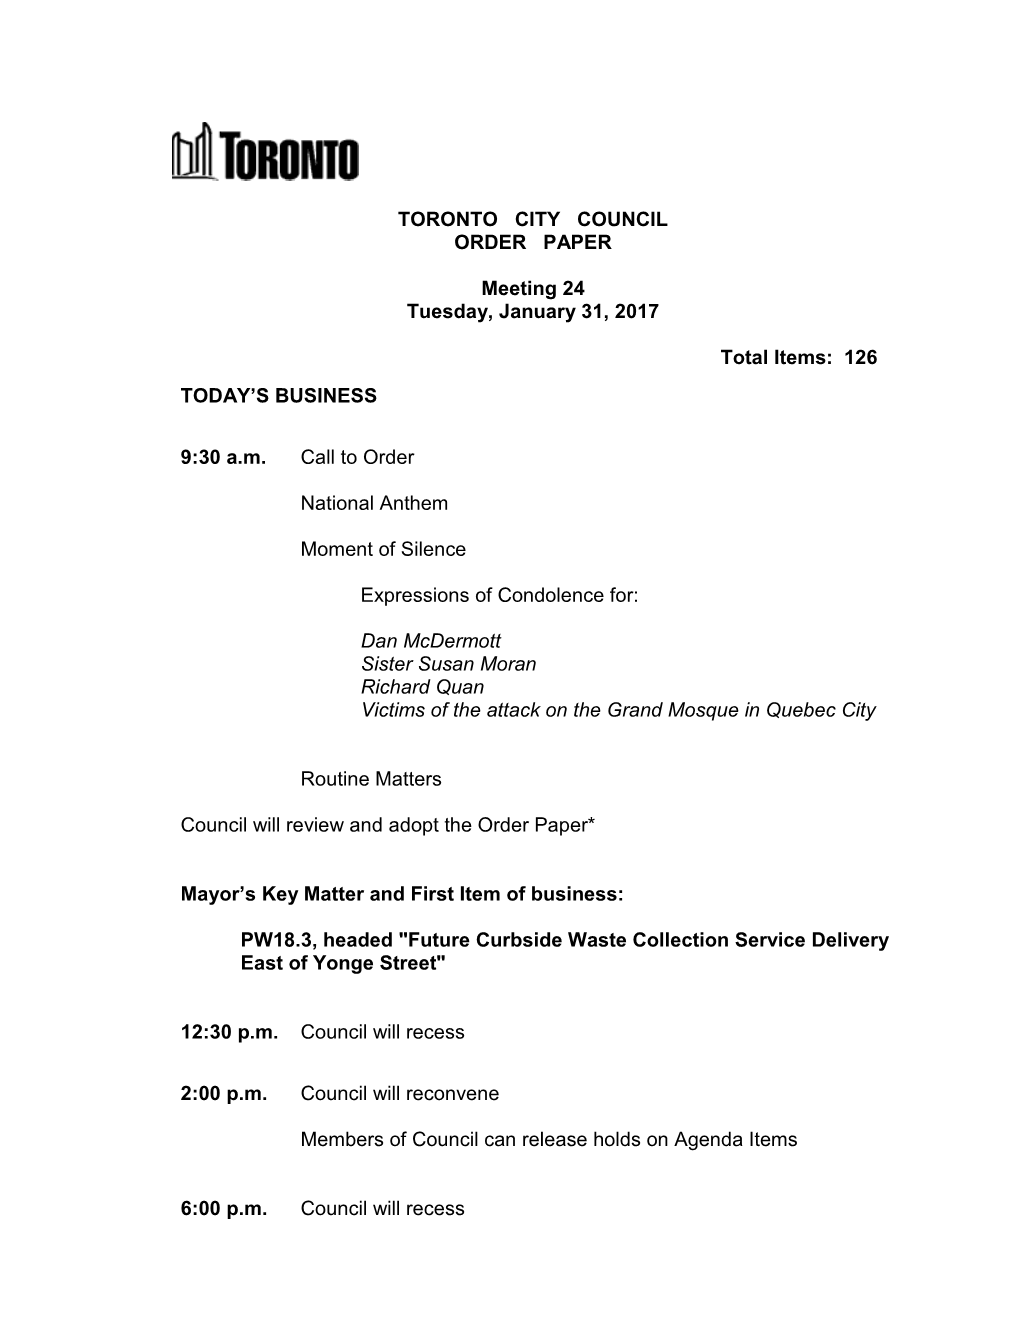 TORONTO CITY COUNCIL ORDER PAPER Meeting 24 Tuesday